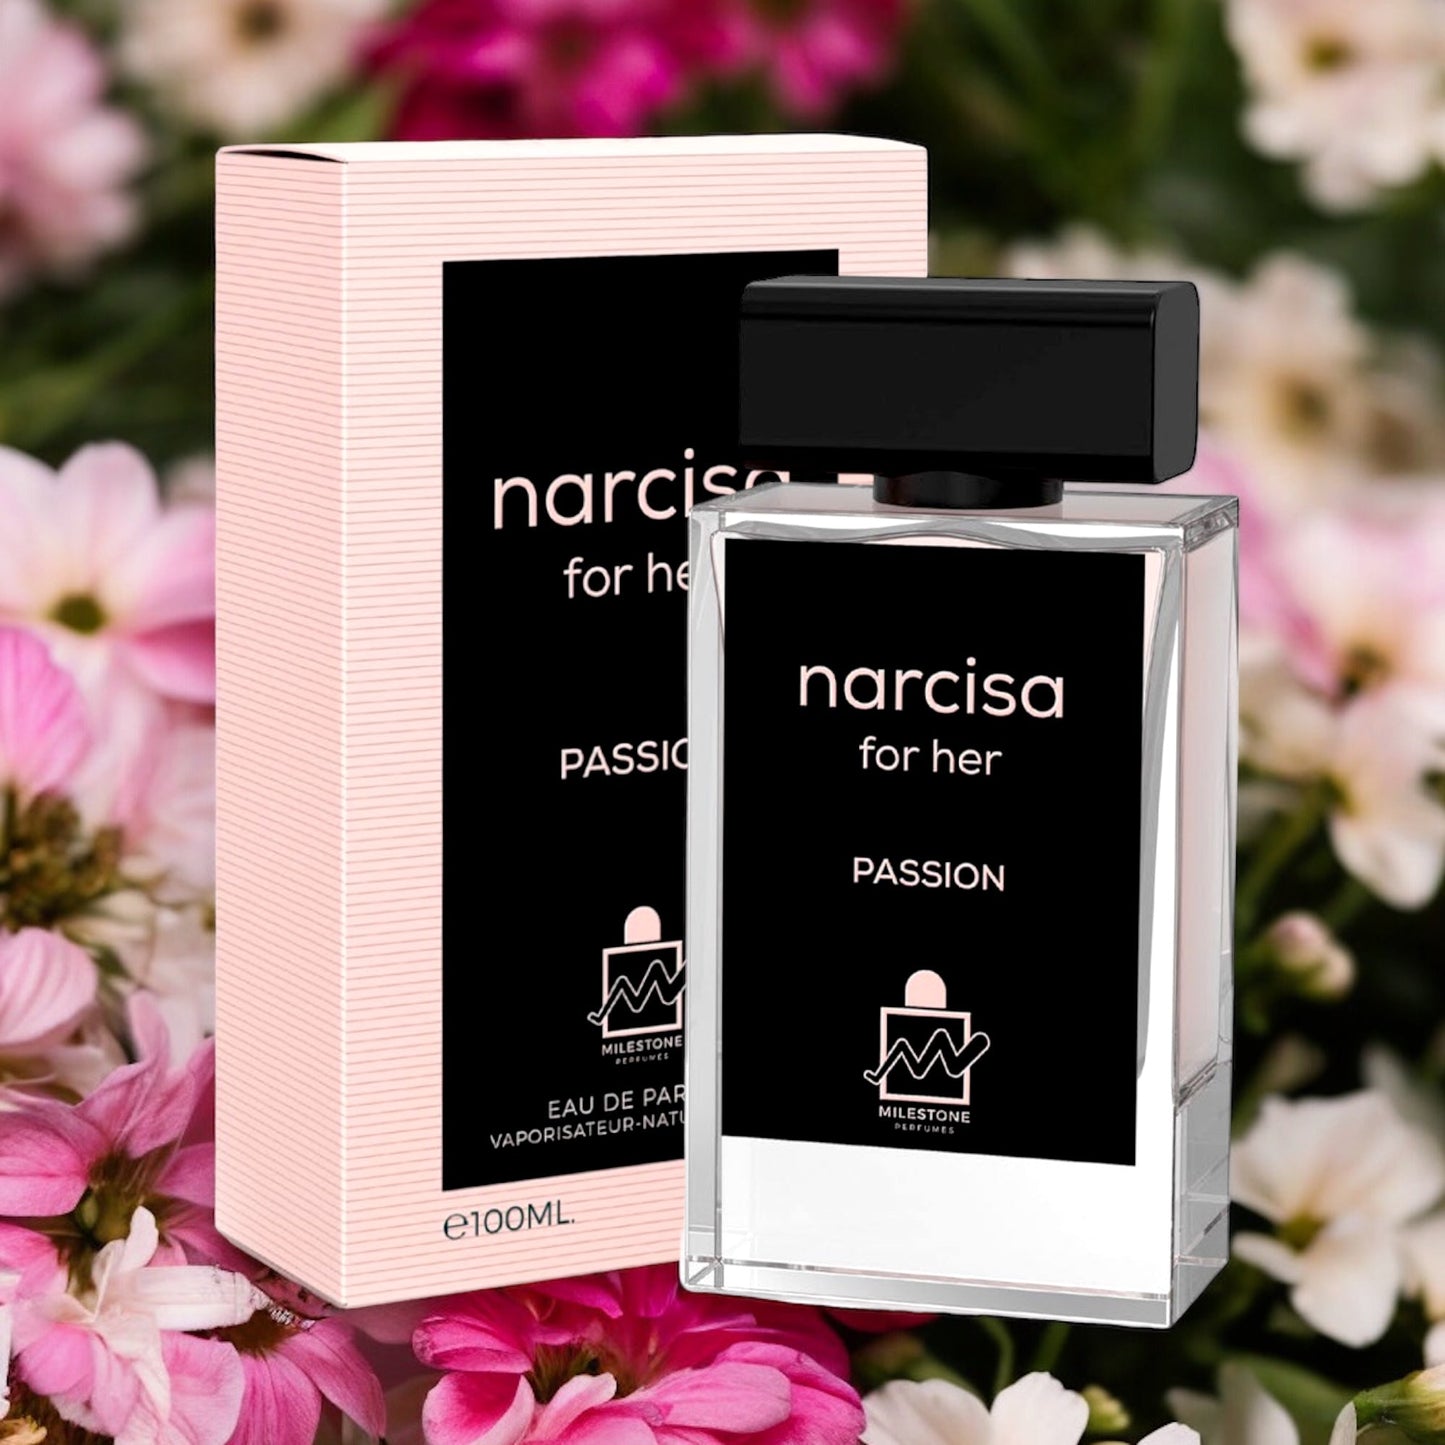 Narcisa Passion for Her by Milestone Perfumes Eau de Parfum for Women 3.4 oz